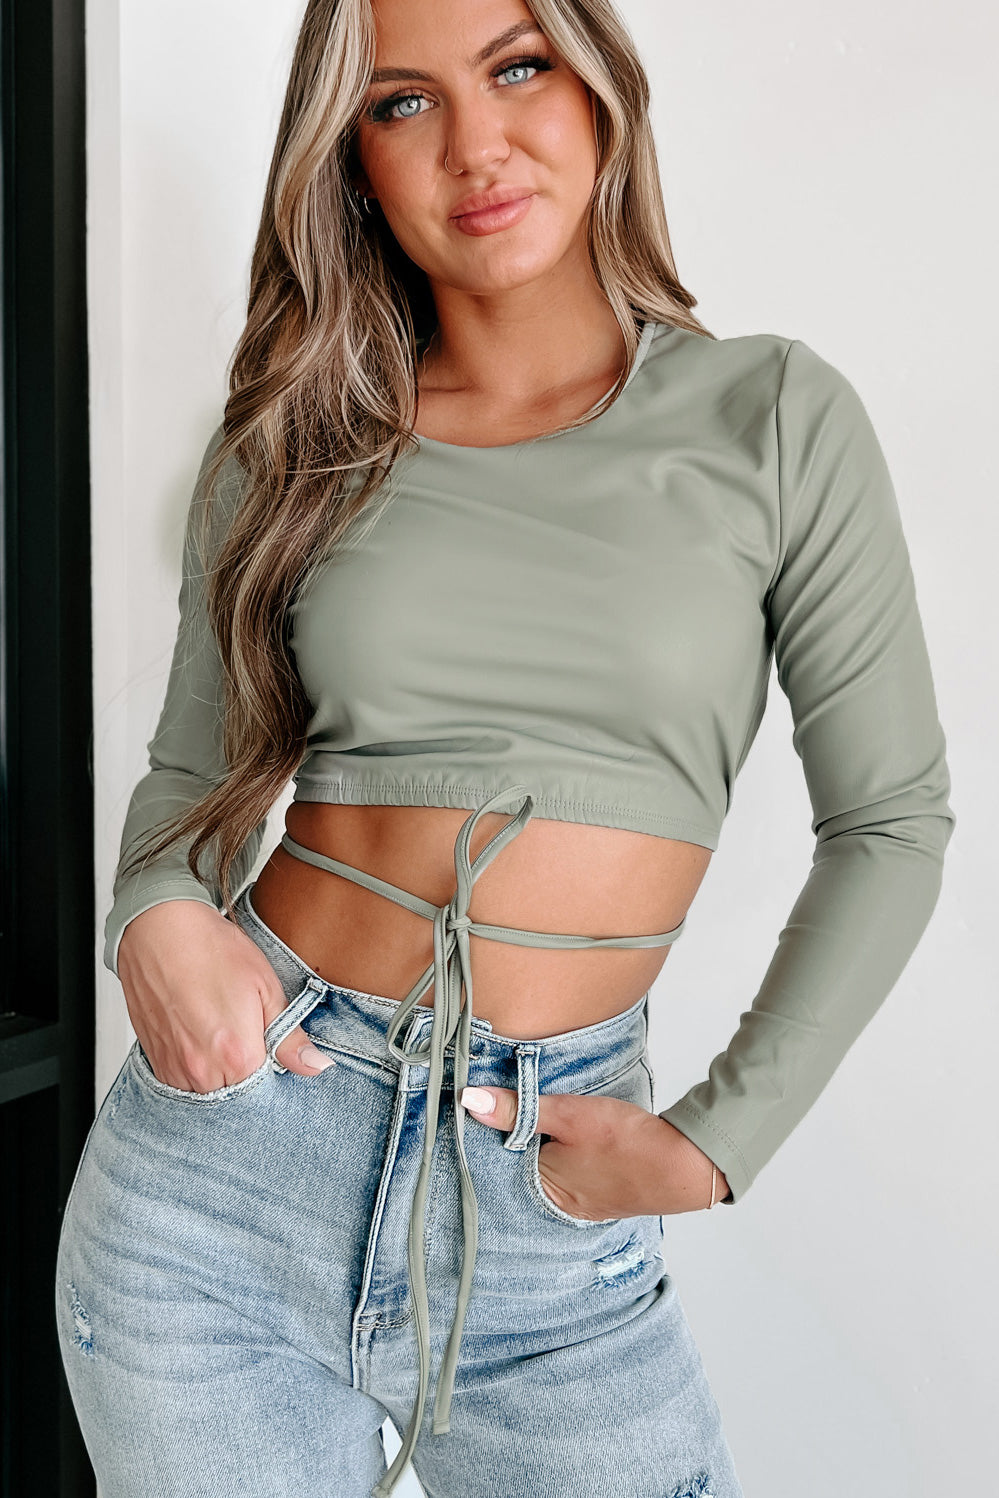 Going Out Tonight Faux Leather Long Sleeve Crop Top (Sage) - NanaMacs